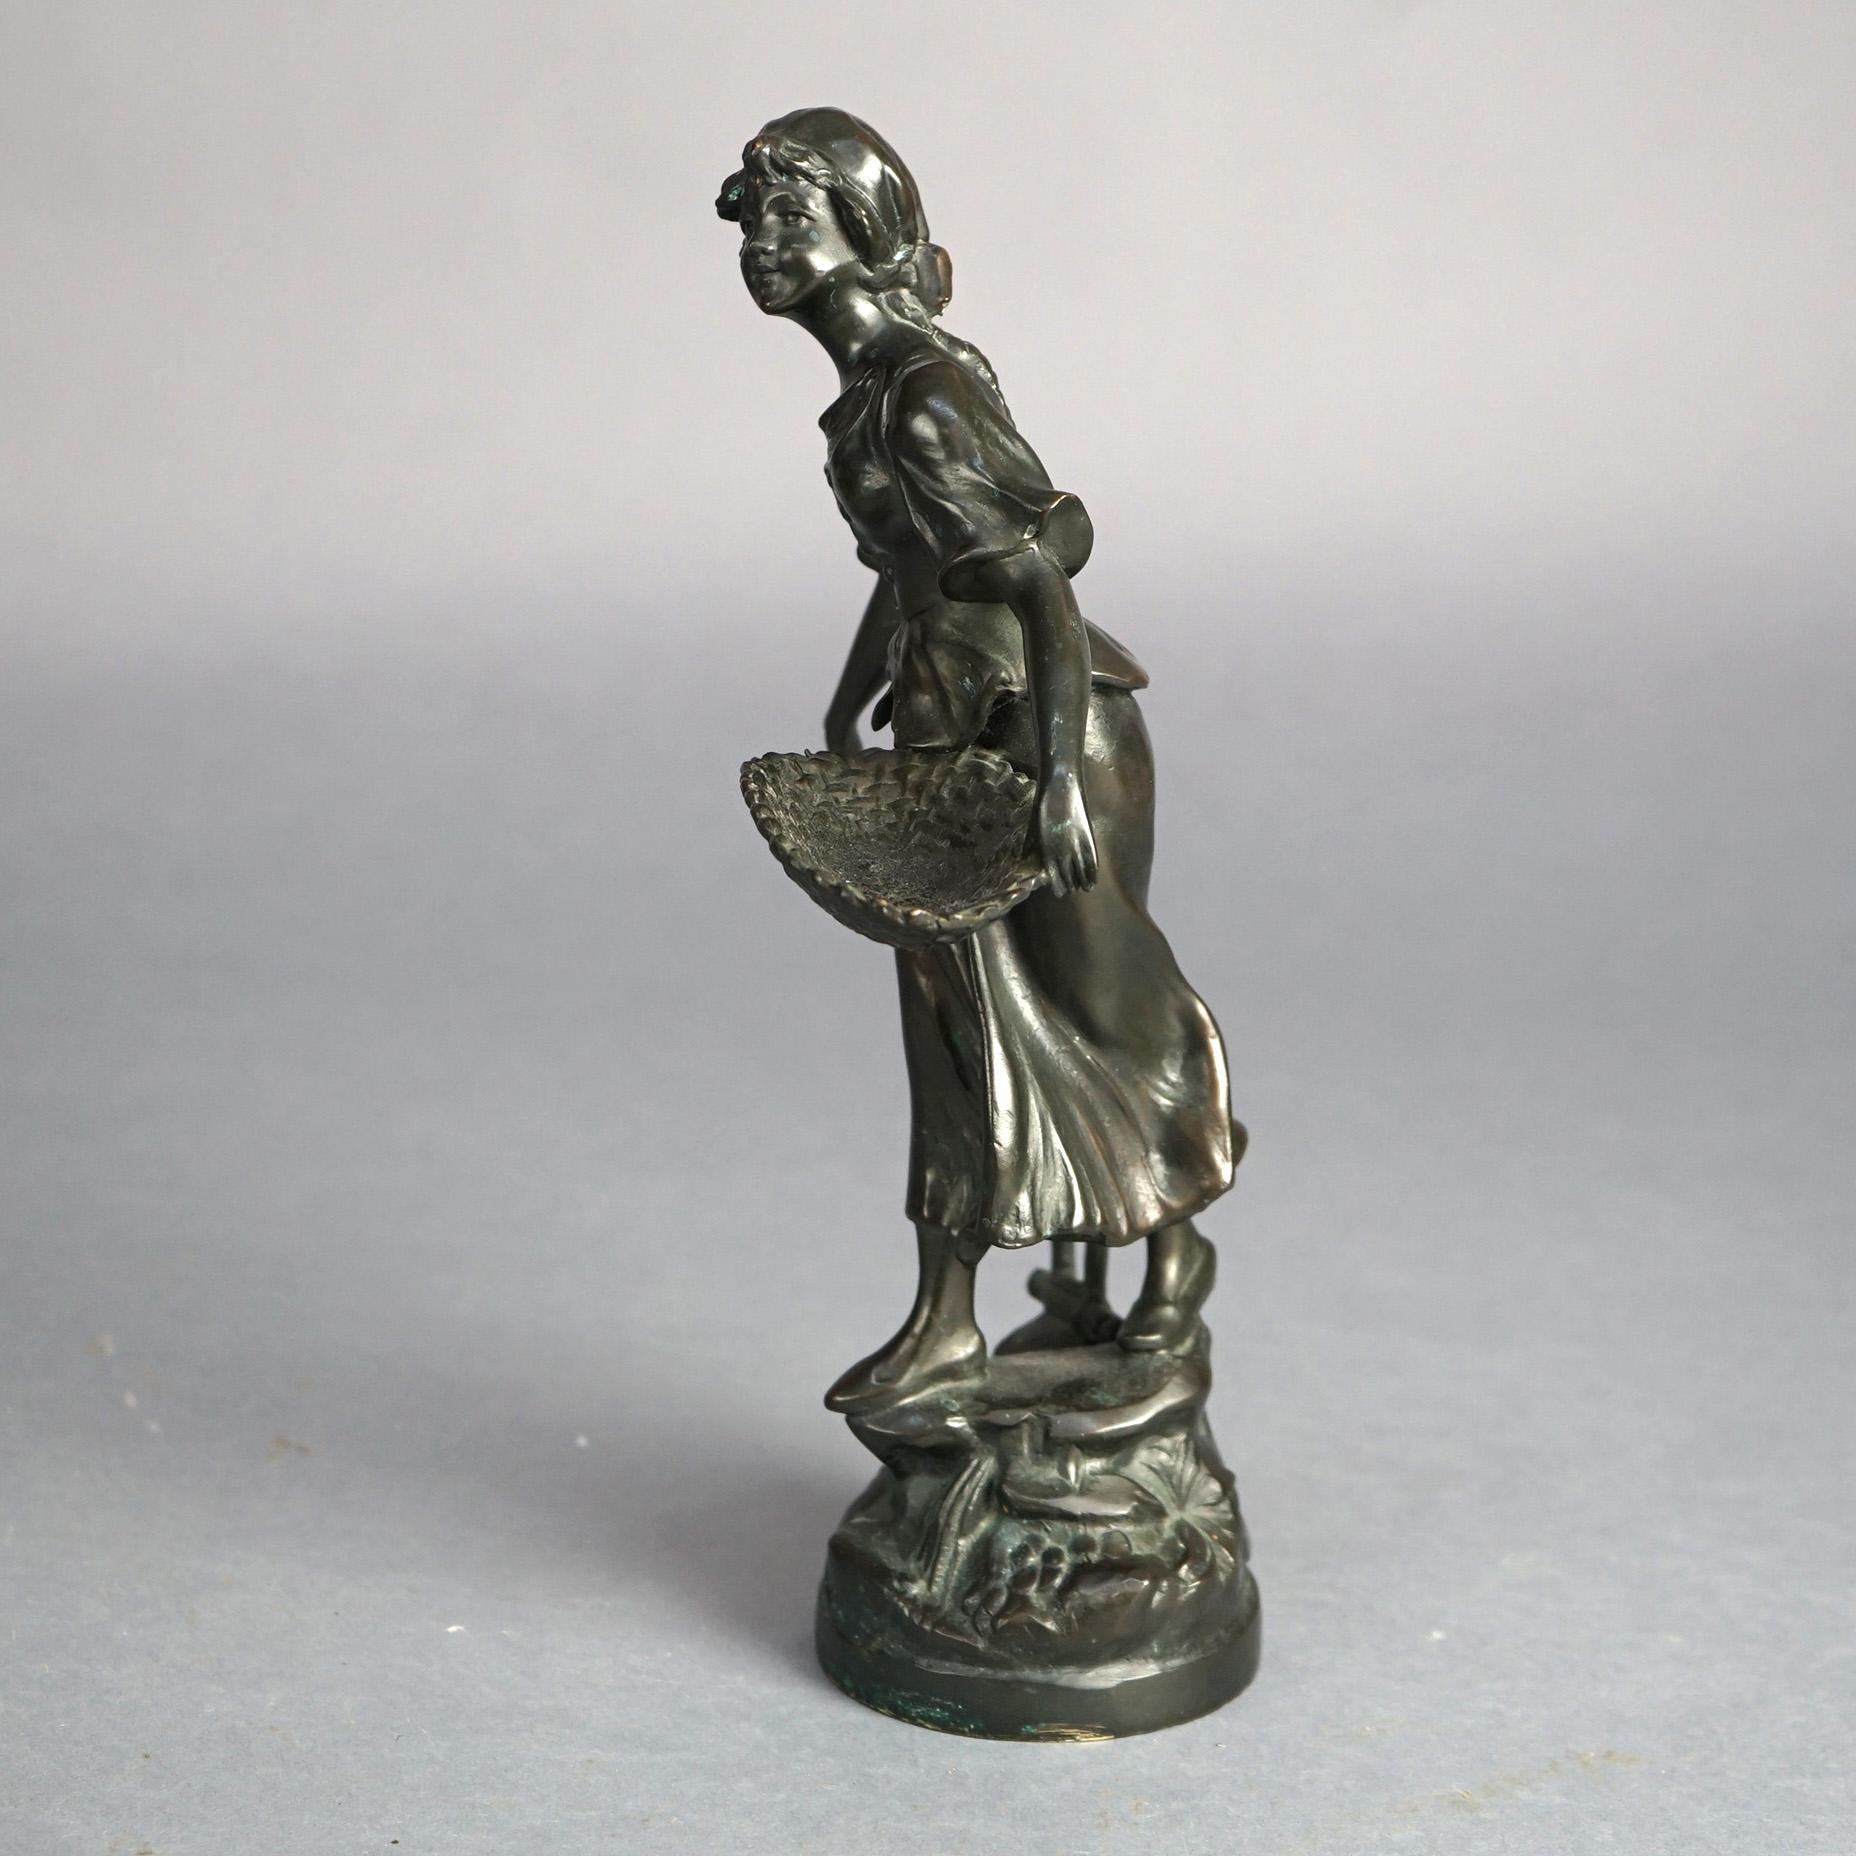 Antique Figural Cast Bronze Statue of a Harvest Maiden in Countryside Setting with Foundry Mark AL 468 C1900

Measures- 12''H x 6.5''W x 4.5''D